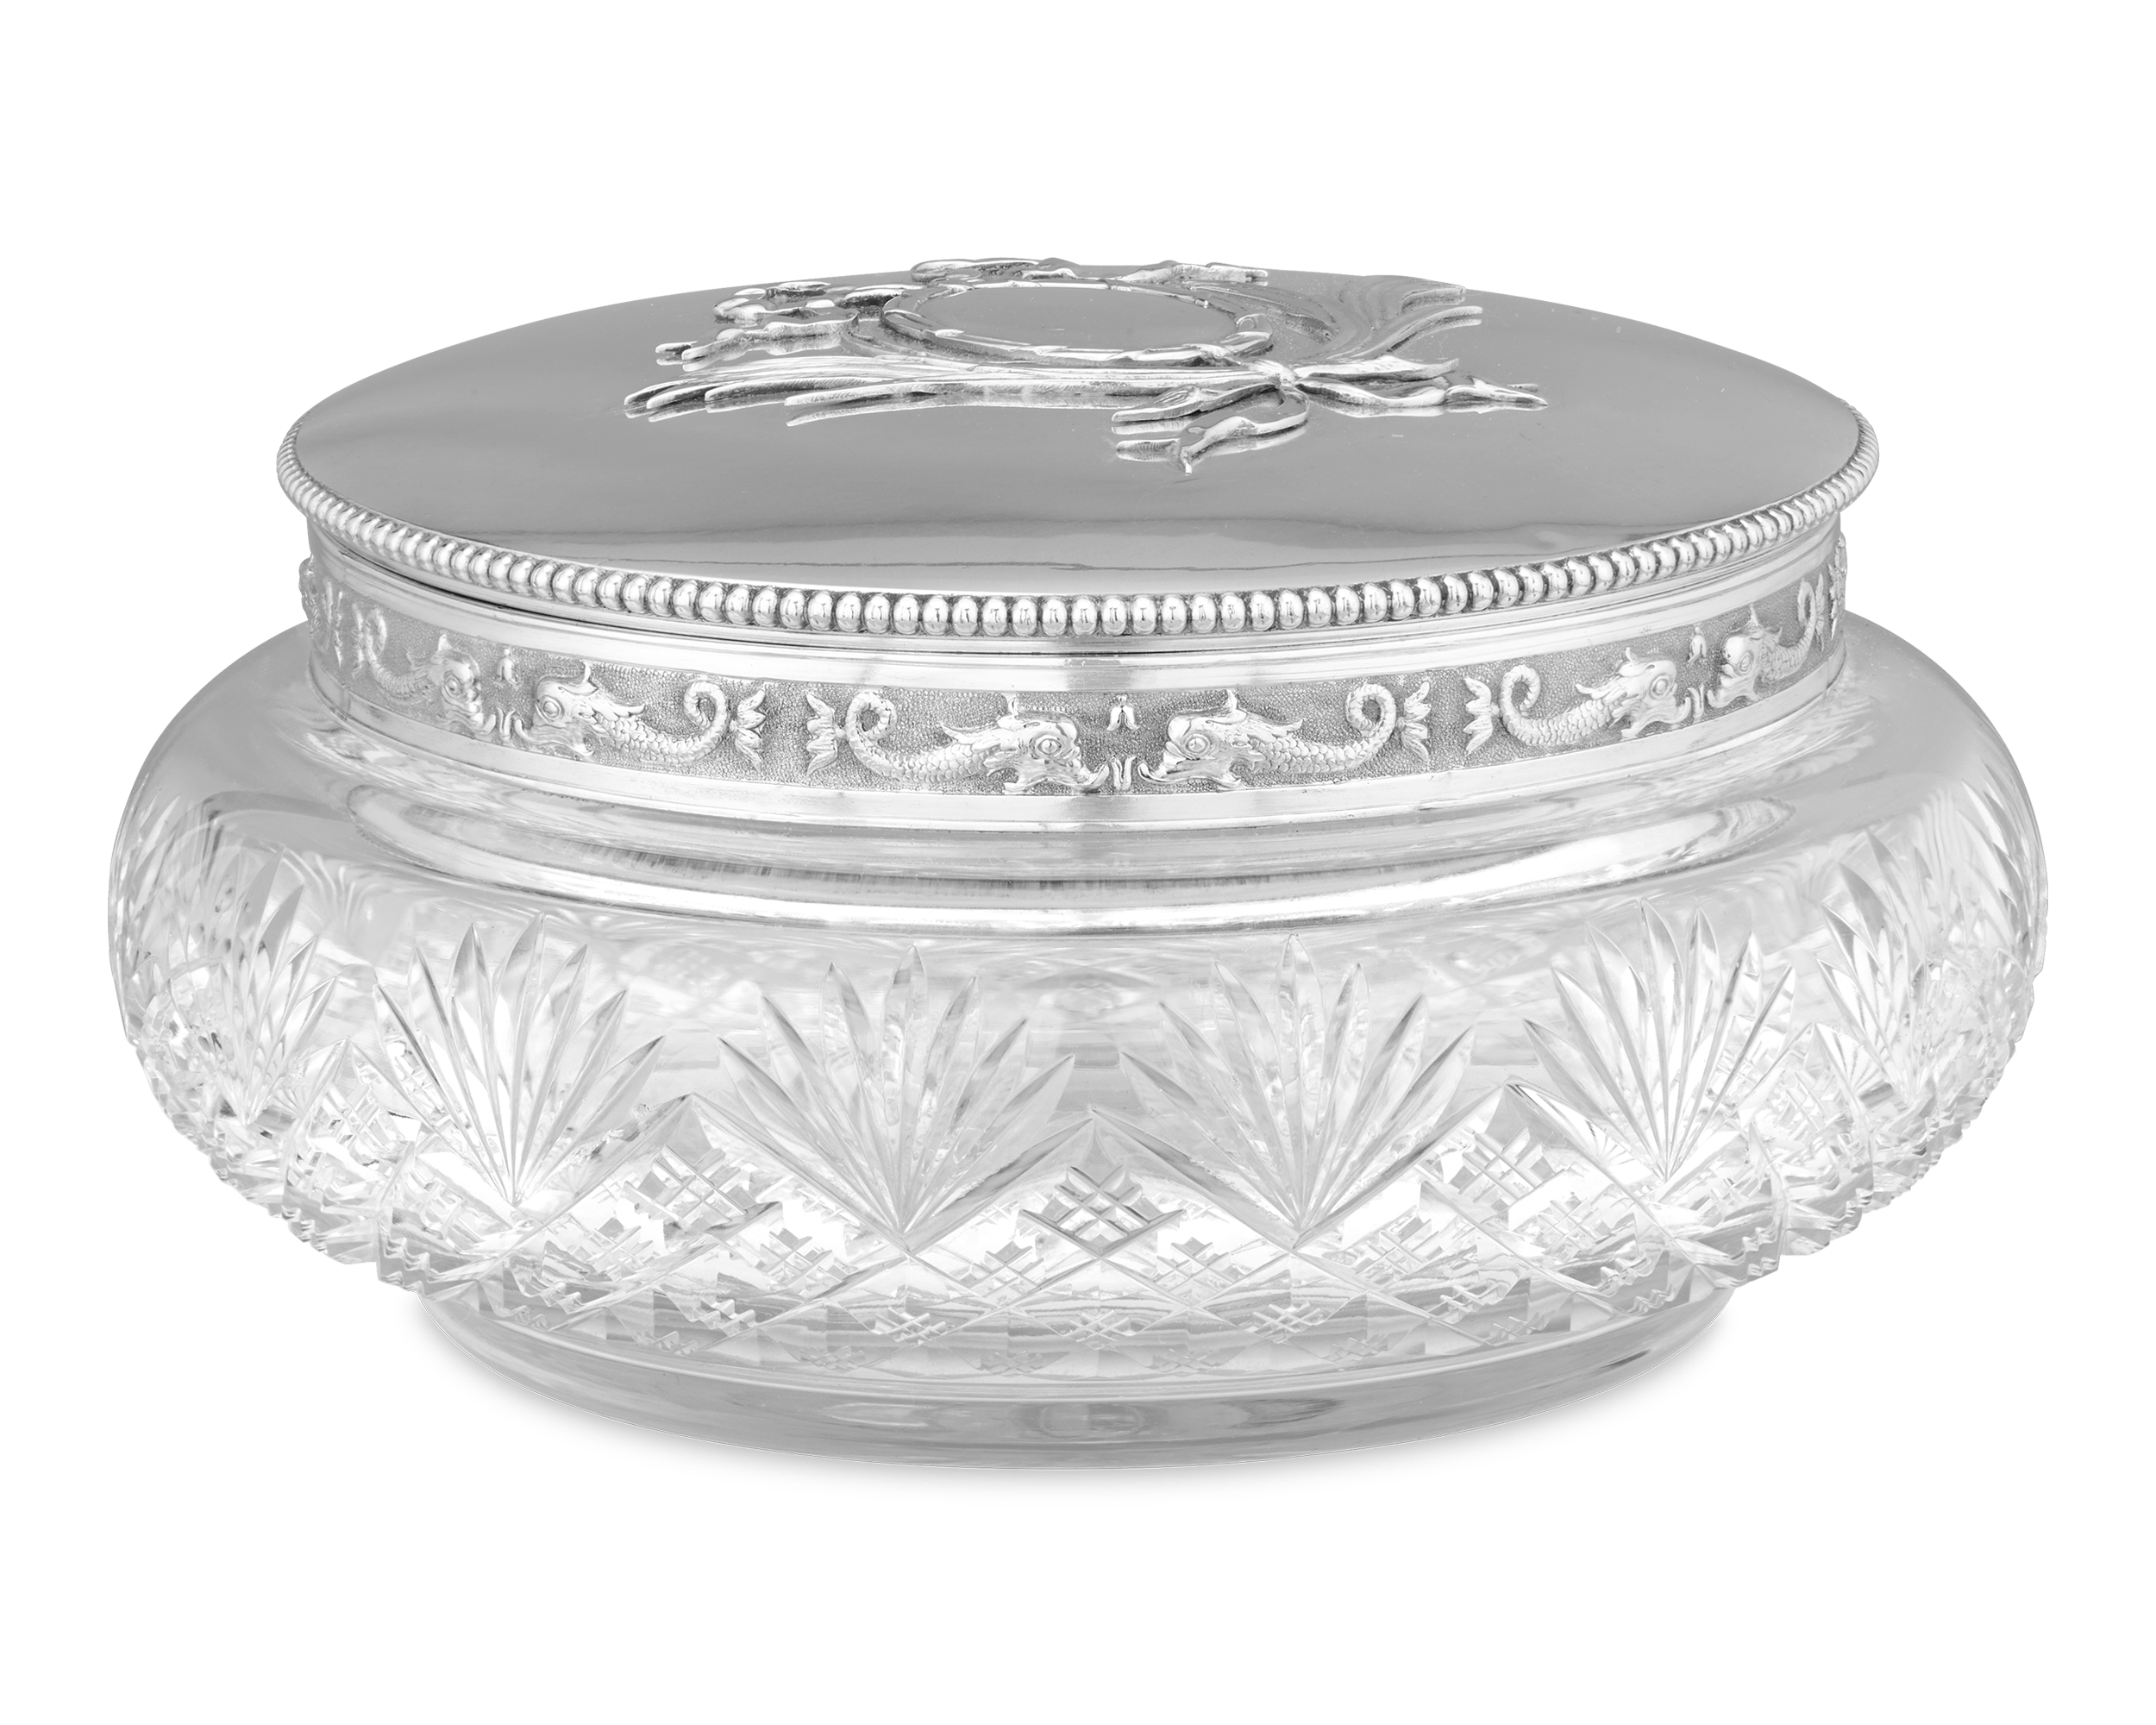 Fabergé Silver-Mounted Glass Covered Box